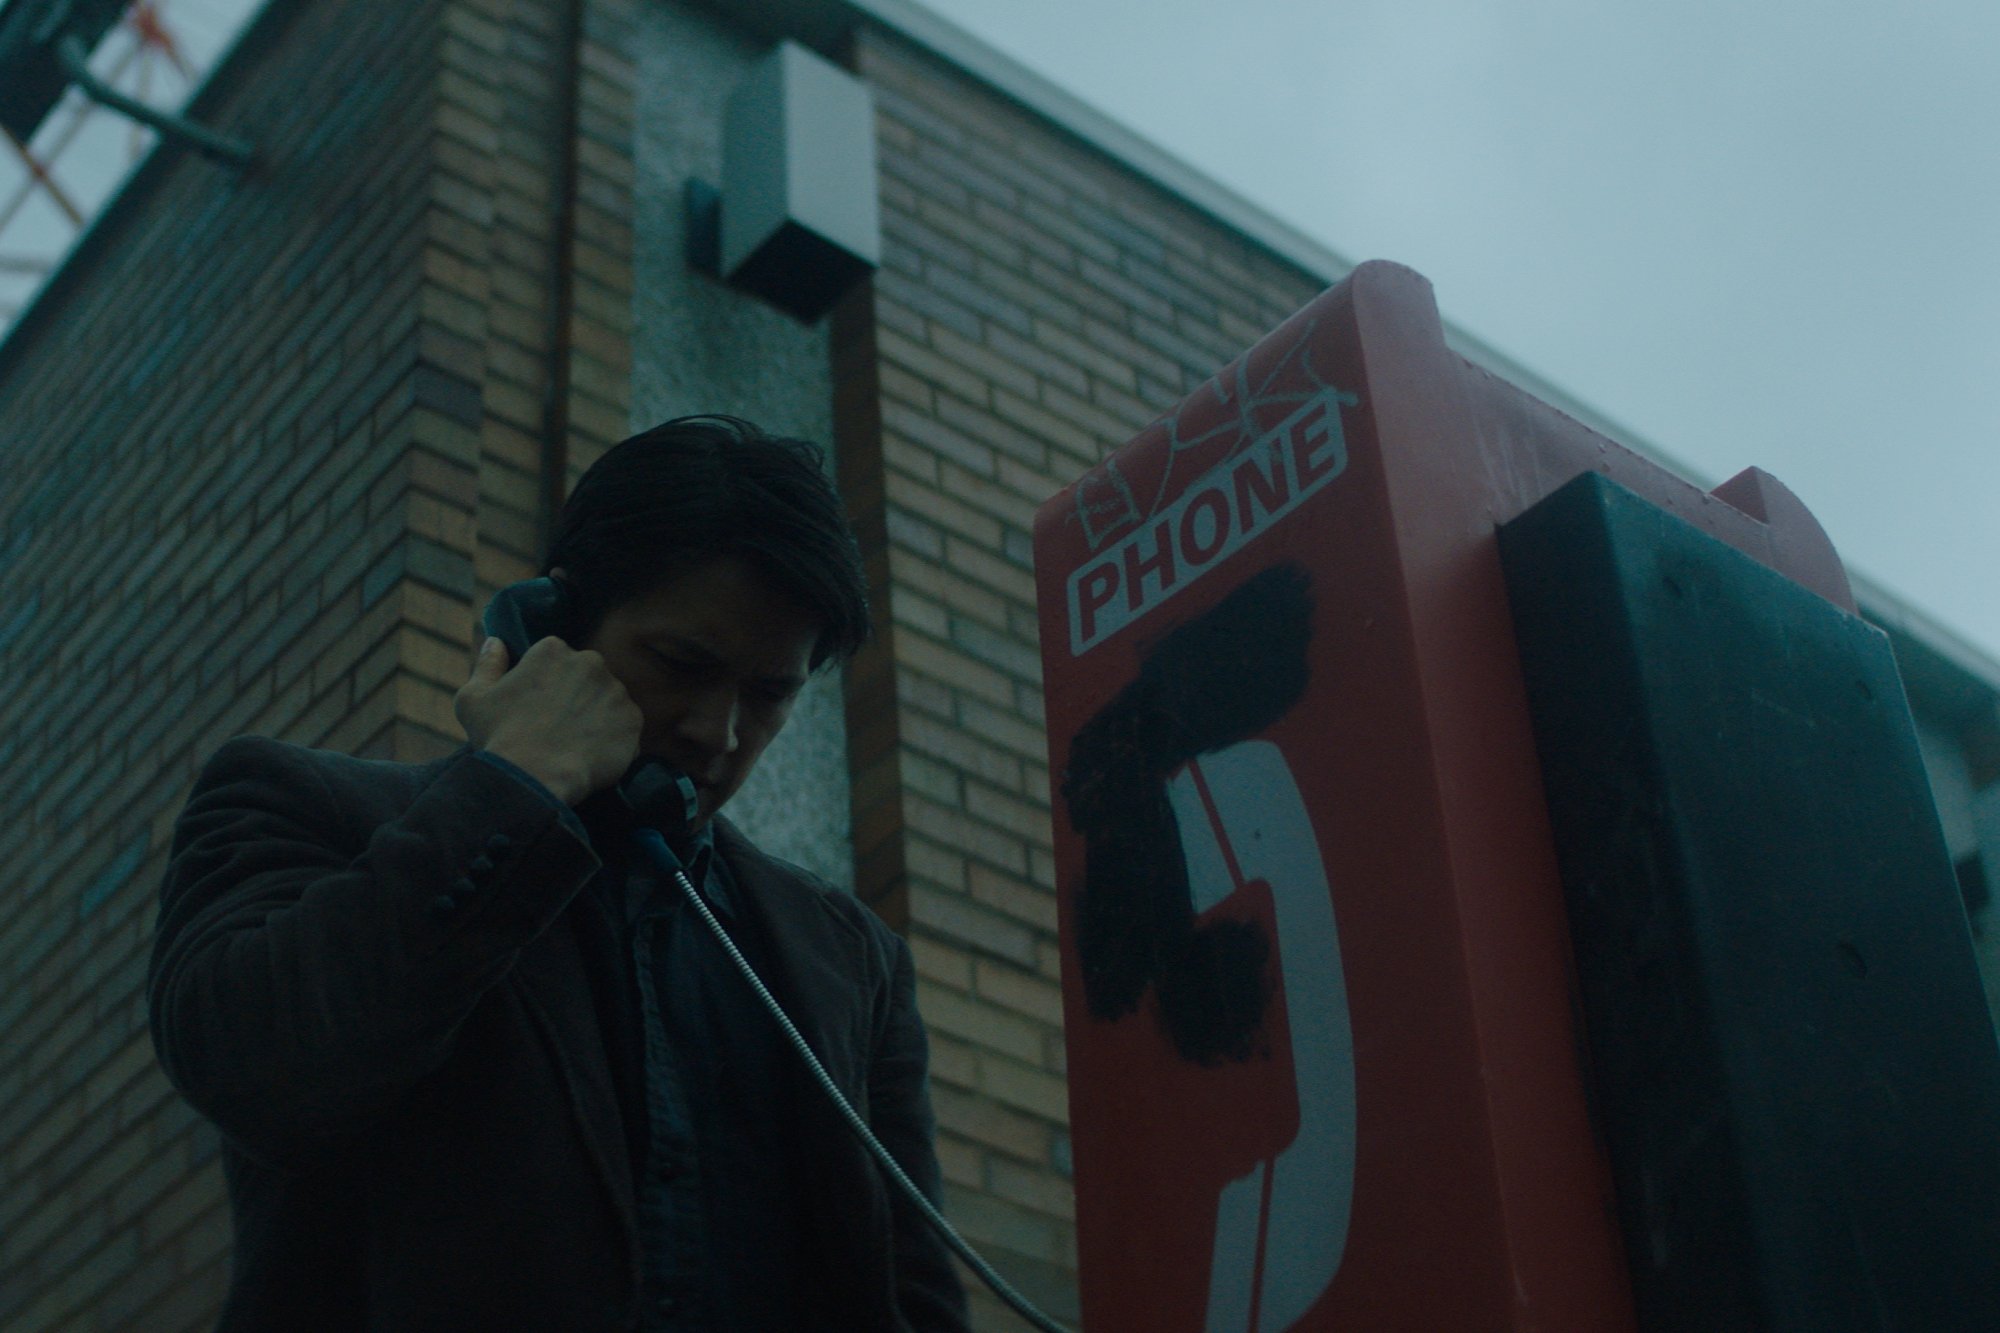 'Broadcast Signal Intrusion' actor Henry Shum Jr. at payphone outside